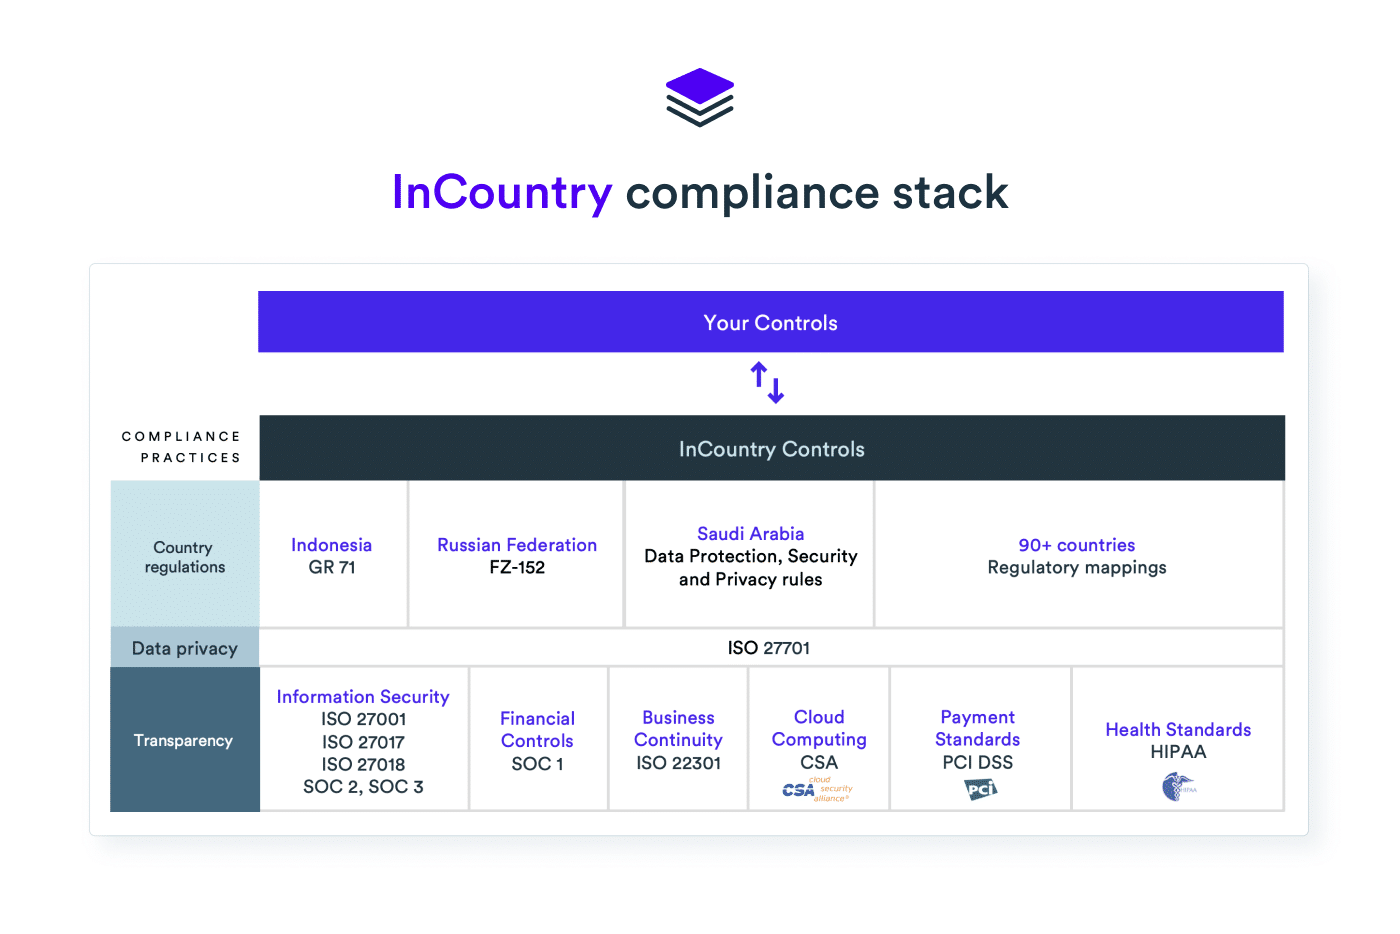 InCountry Compliance